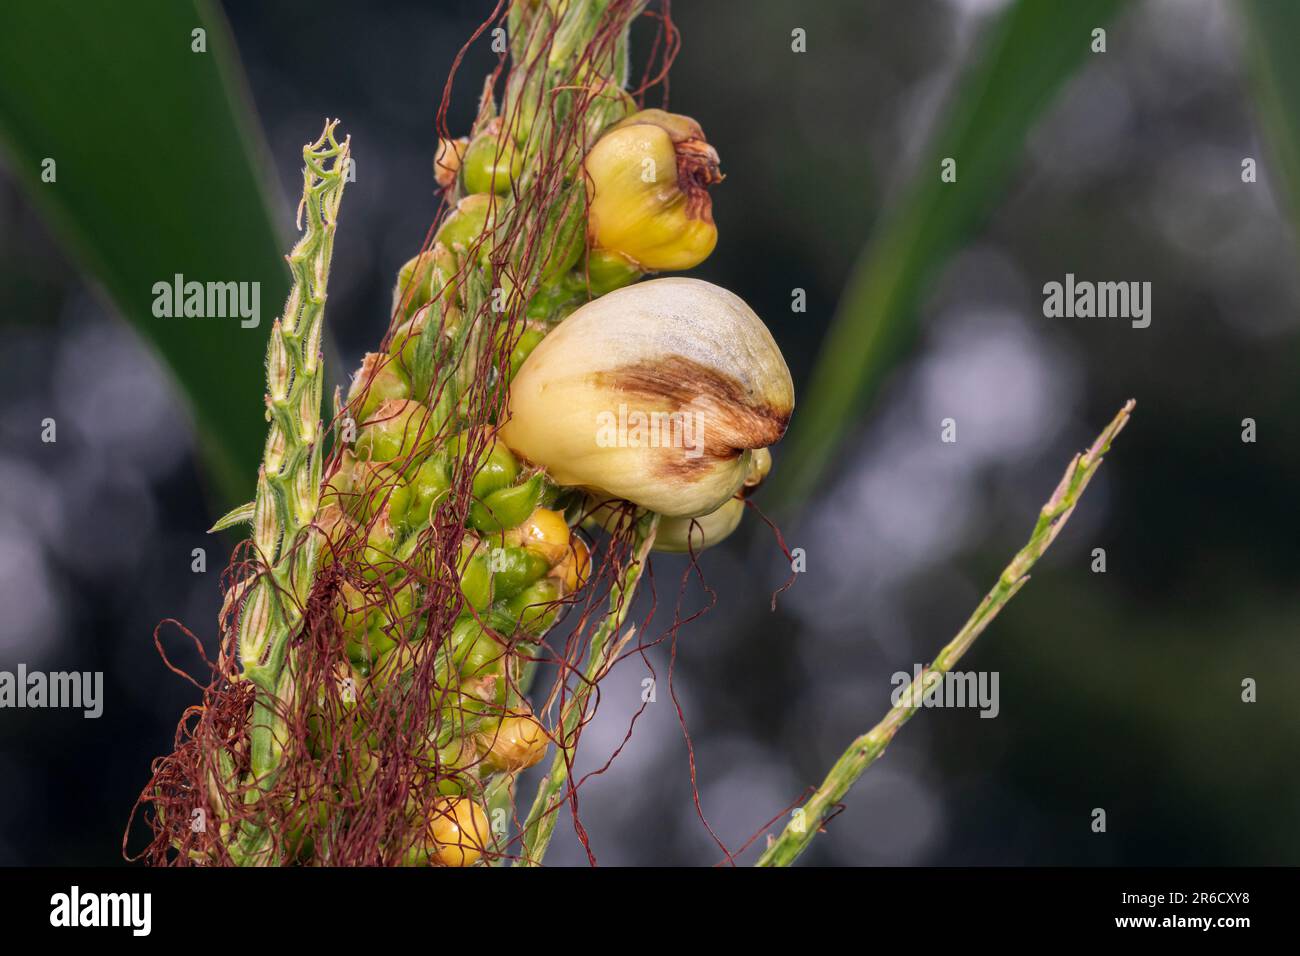 Corn smut galls on tassel of cornstalk. Farming, agriculture and plant disease concept. Stock Photo